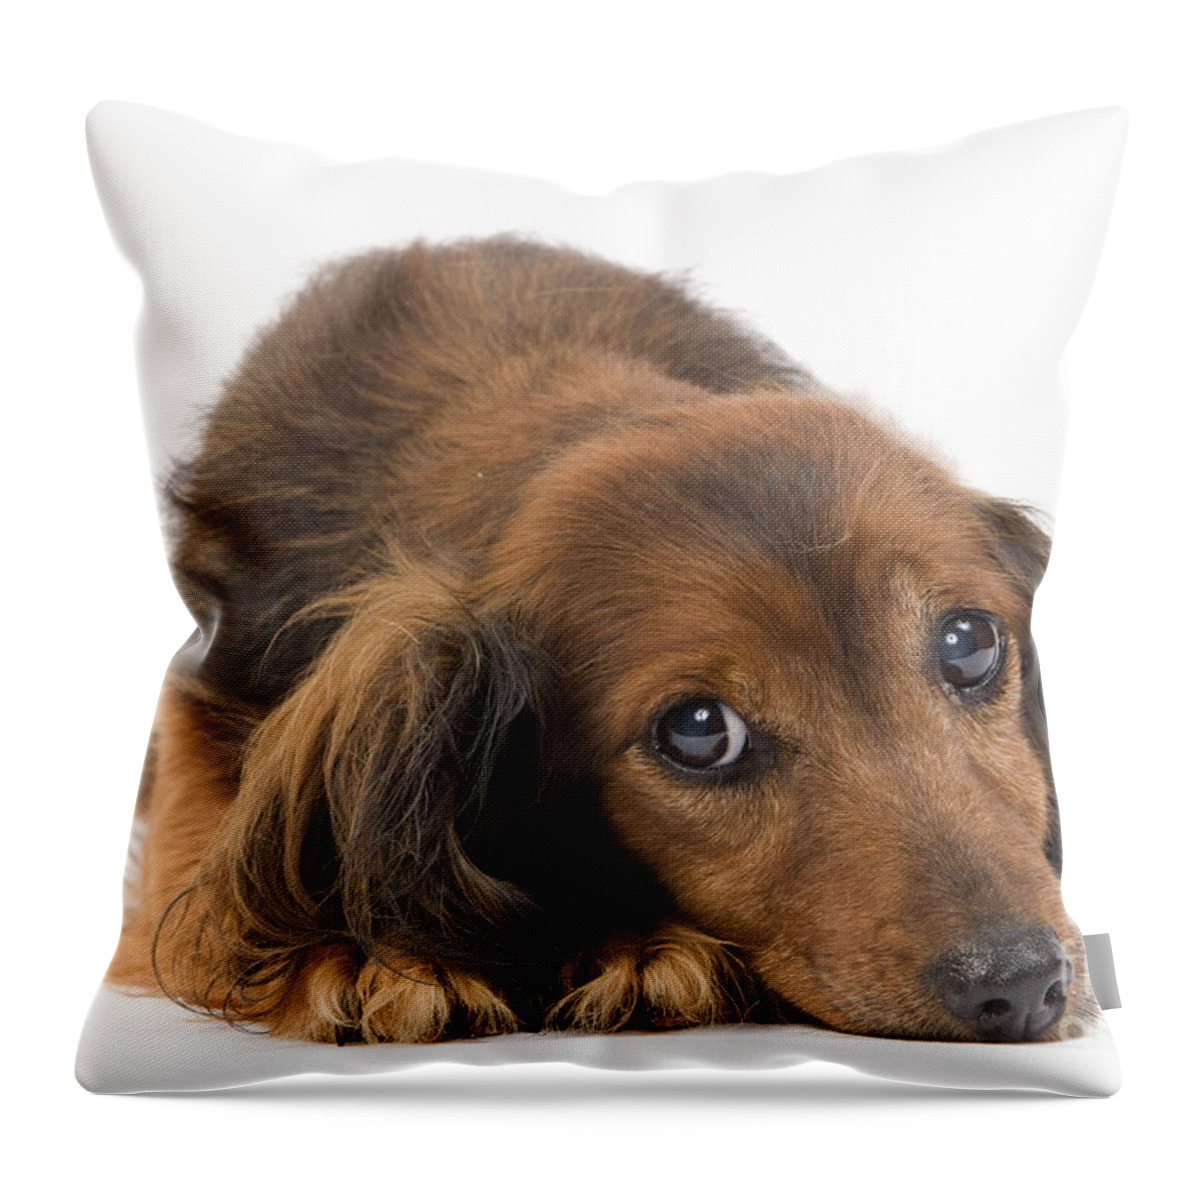 Dachshund Throw Pillow featuring the photograph Long-haired Dachshund by Jean-Michel Labat